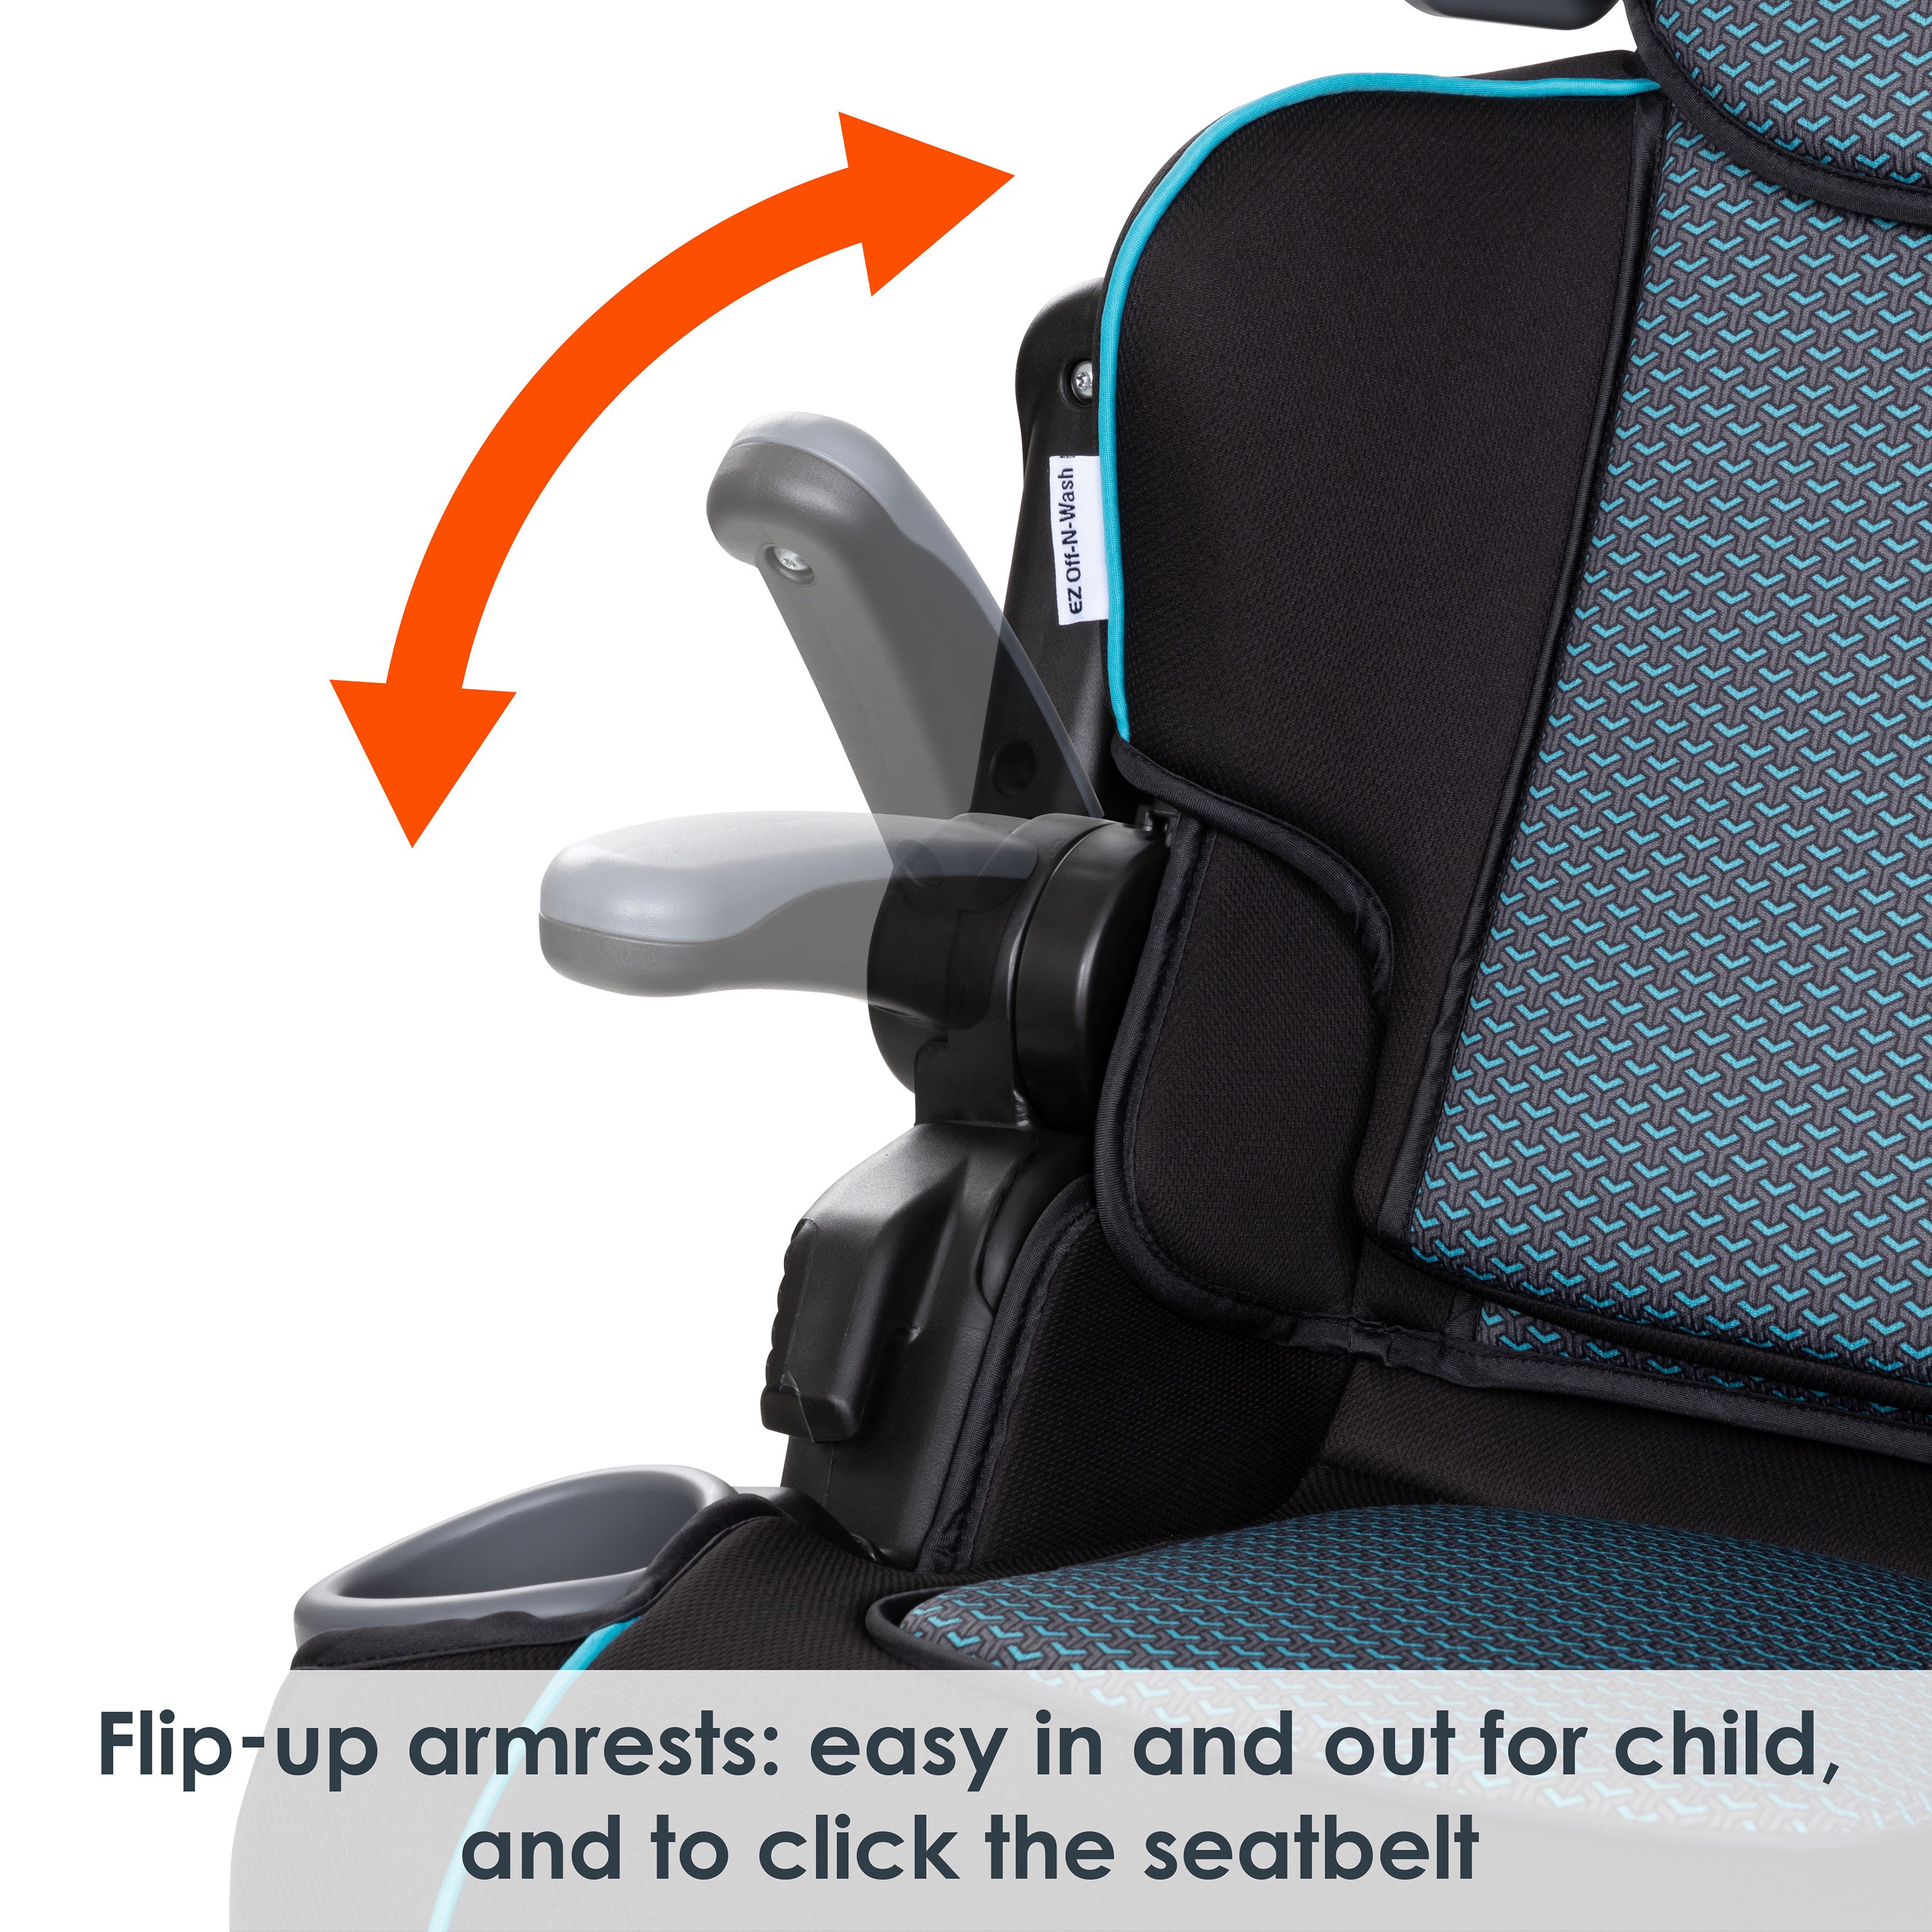 Baby Trend Protect 2-in-1 Booster Seat